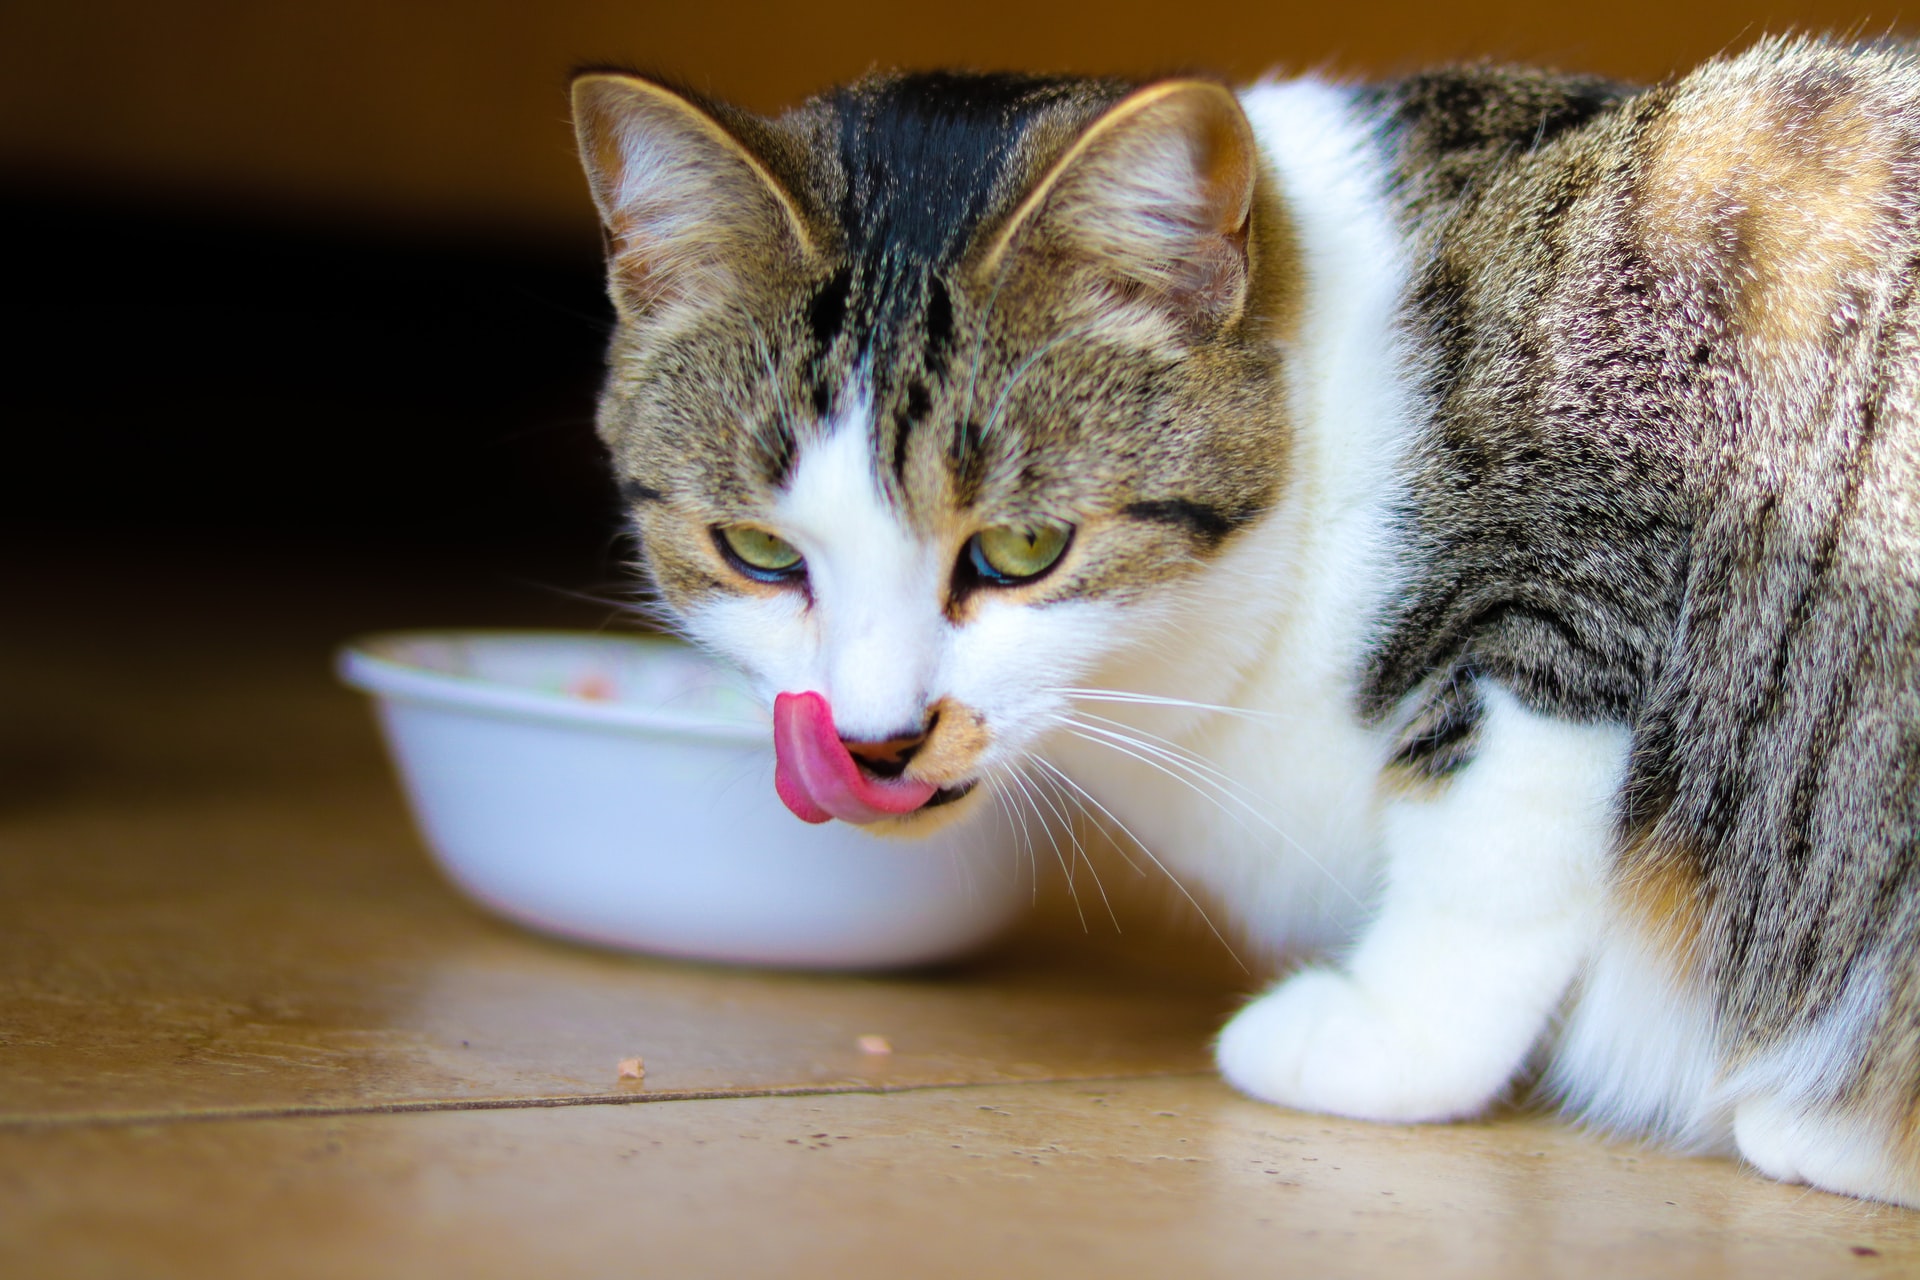 Why Does Cat Food Smell So Bad?